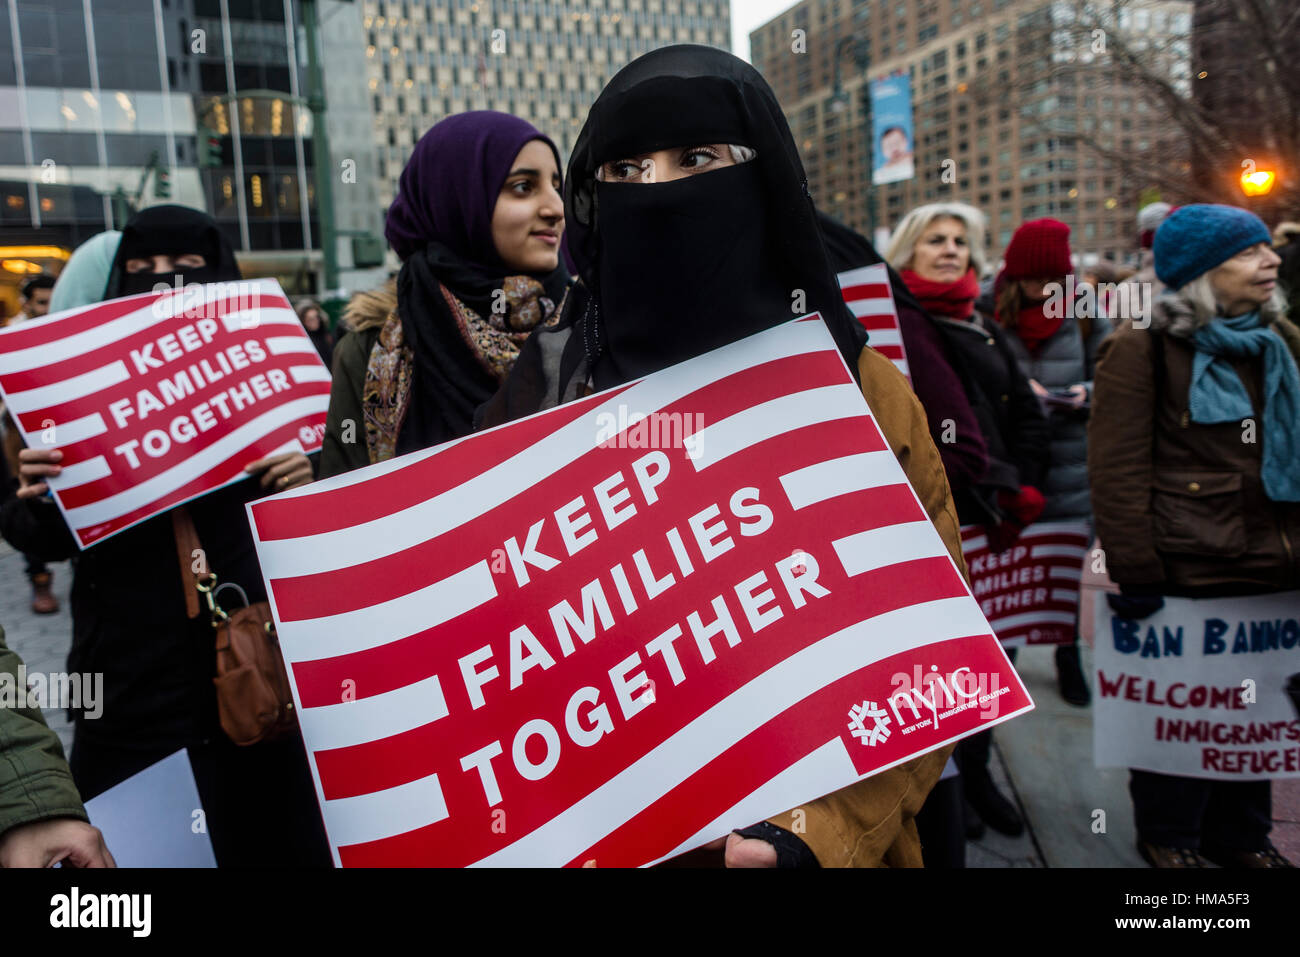 New York City, USA. February 1st, 2017 No Ban No Wall March for Muslims and Allies. Muslims and immigration advocates rally in Foley Square for a march to ICE (Immigration and Customs Enforcement) in the wake of President Trump's travel ban against seven middle eastern nations. Credit: Stacy Walsh Rosenstock/Alamy Live News Stock Photo